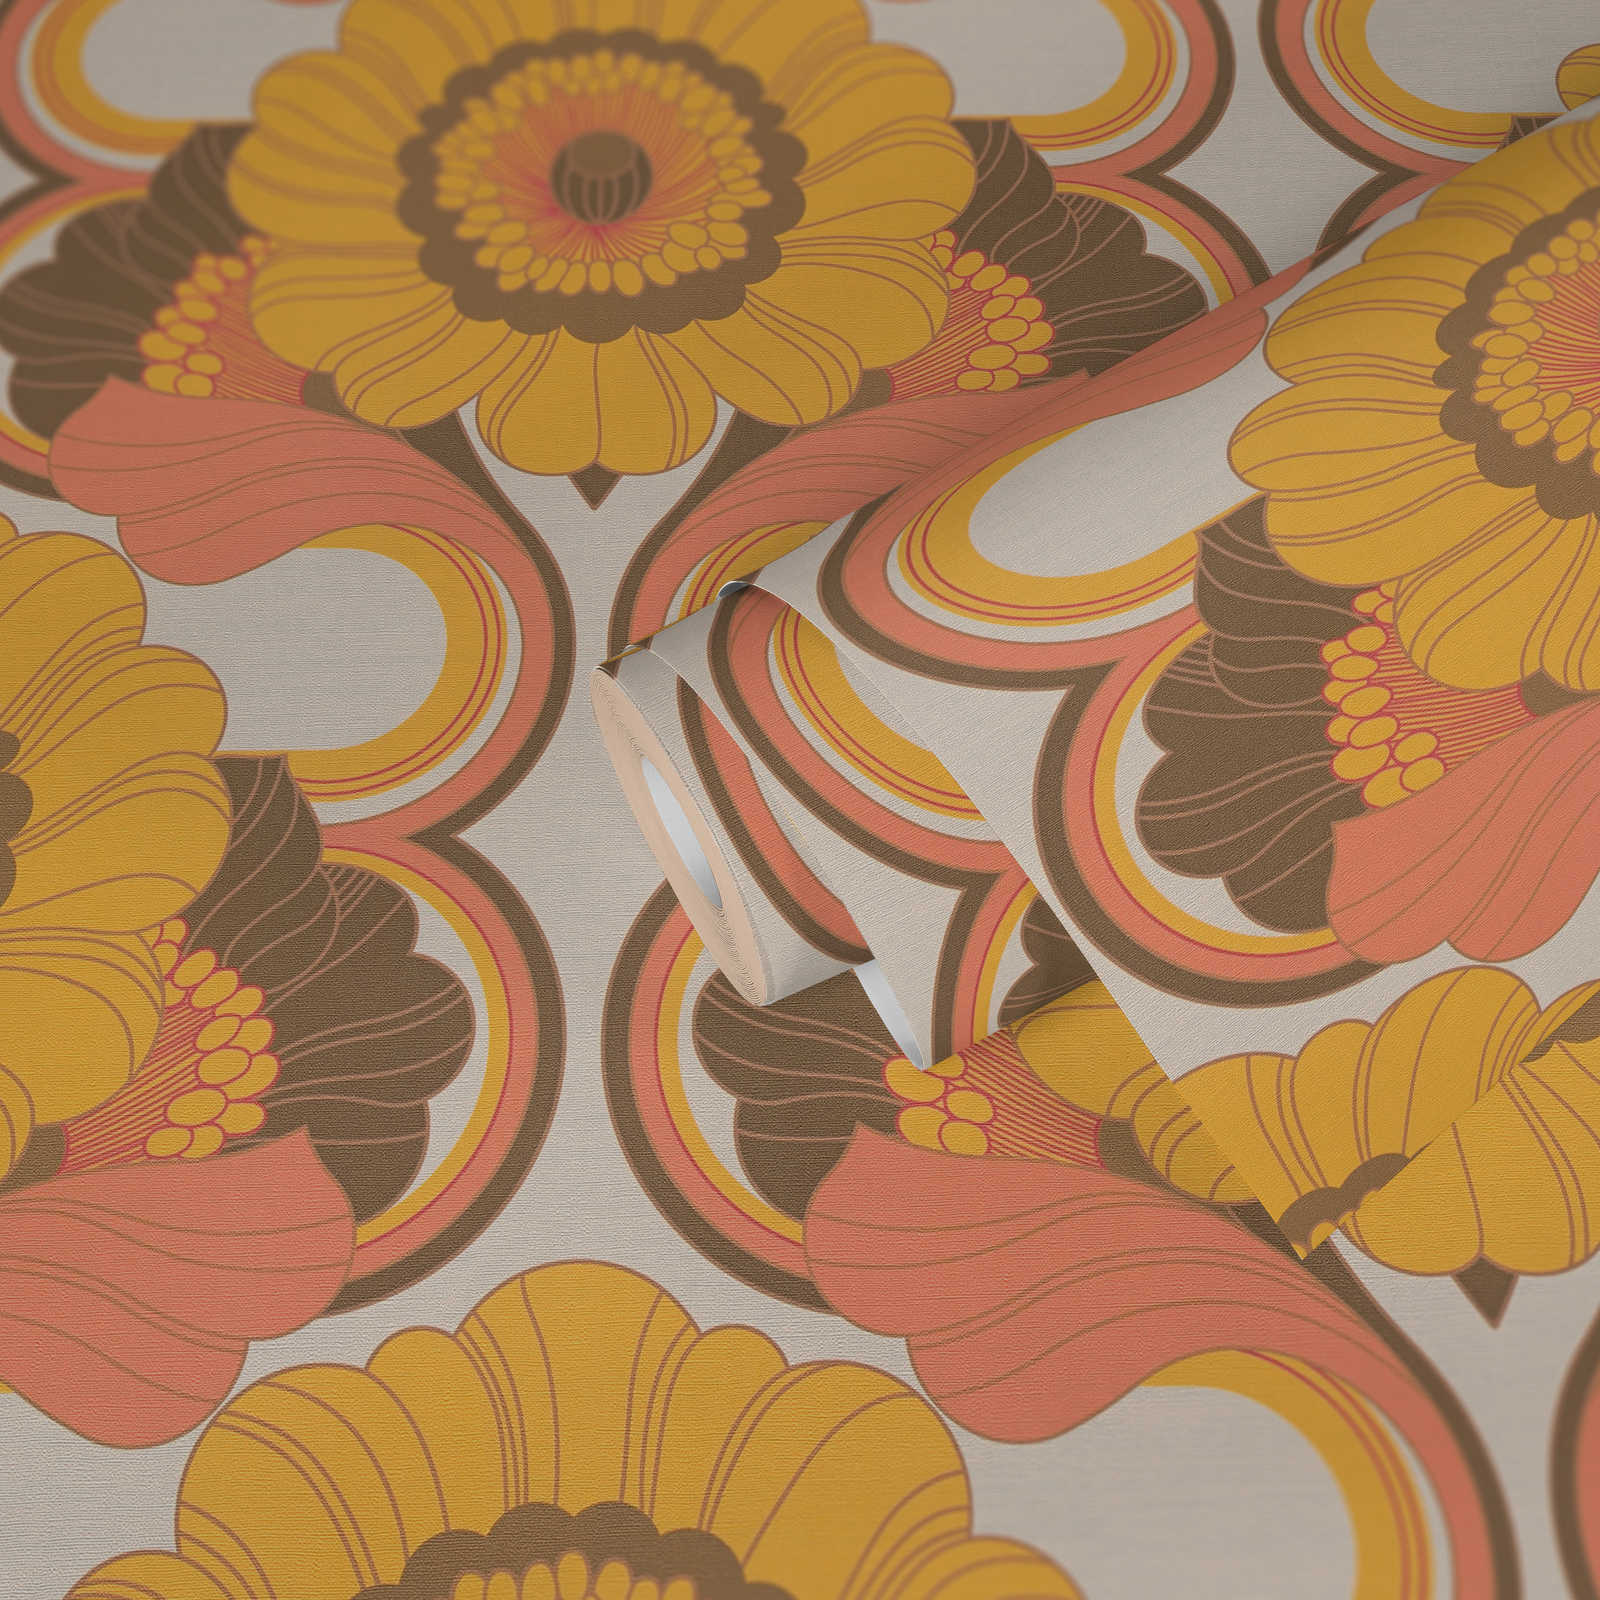             Floral retro wallpaper with floral pattern in warm colours - brown, yellow, orange
        